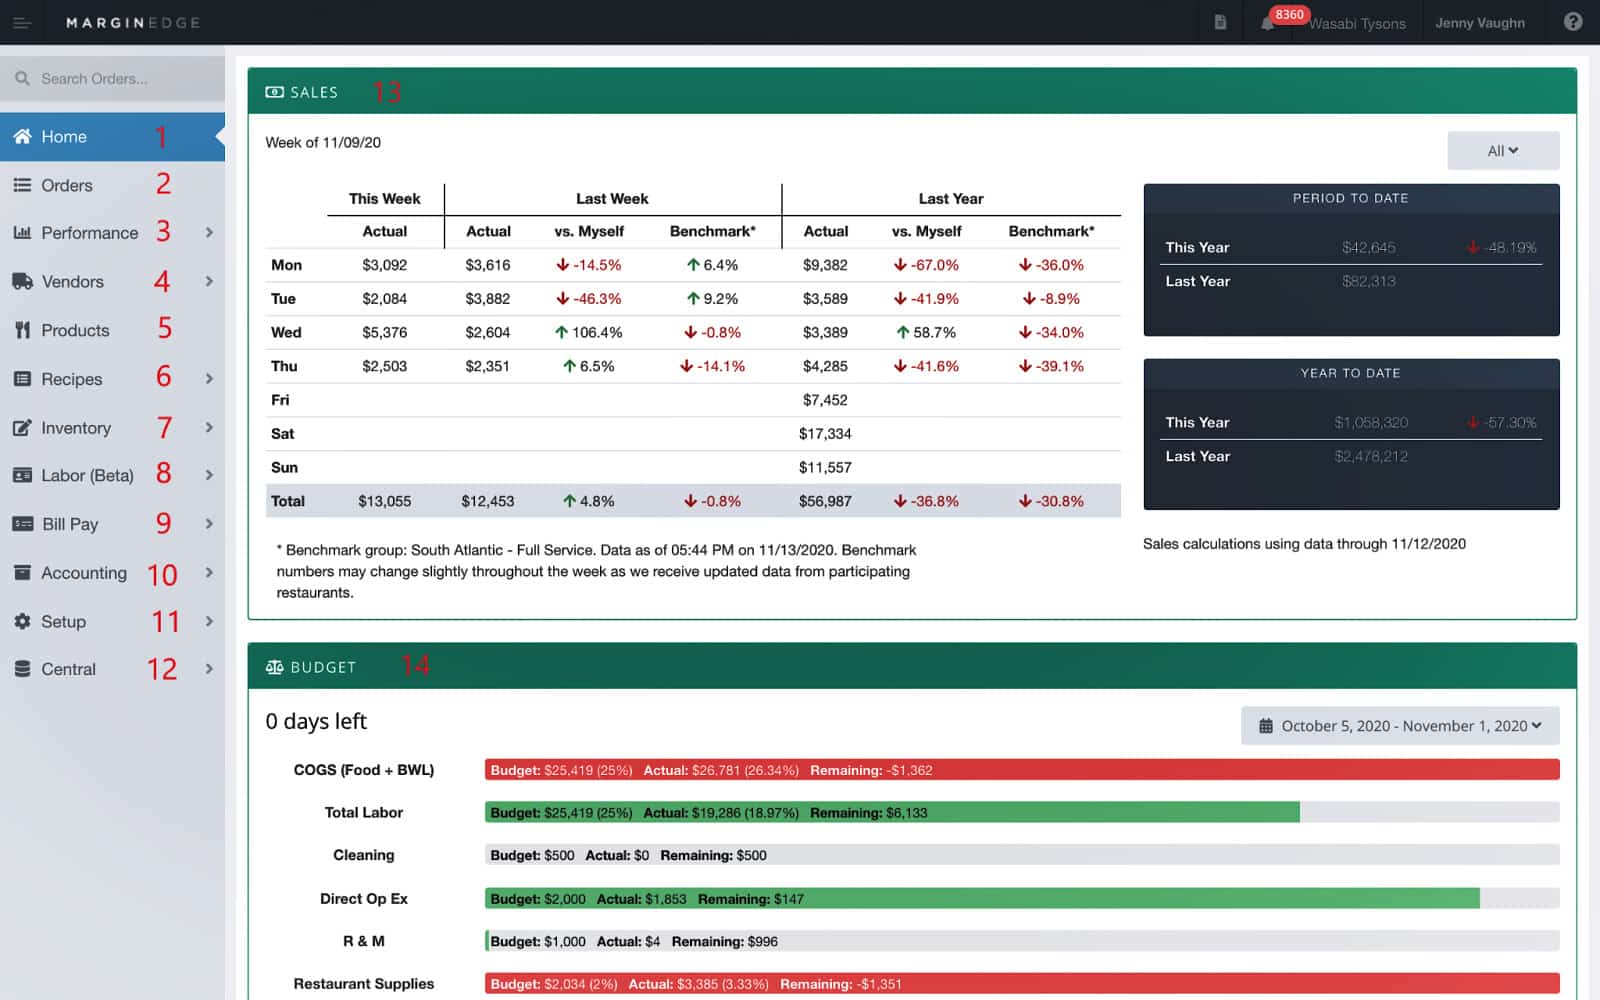 A sample dashboard of MarginEdge with the numbers on its main navigation.